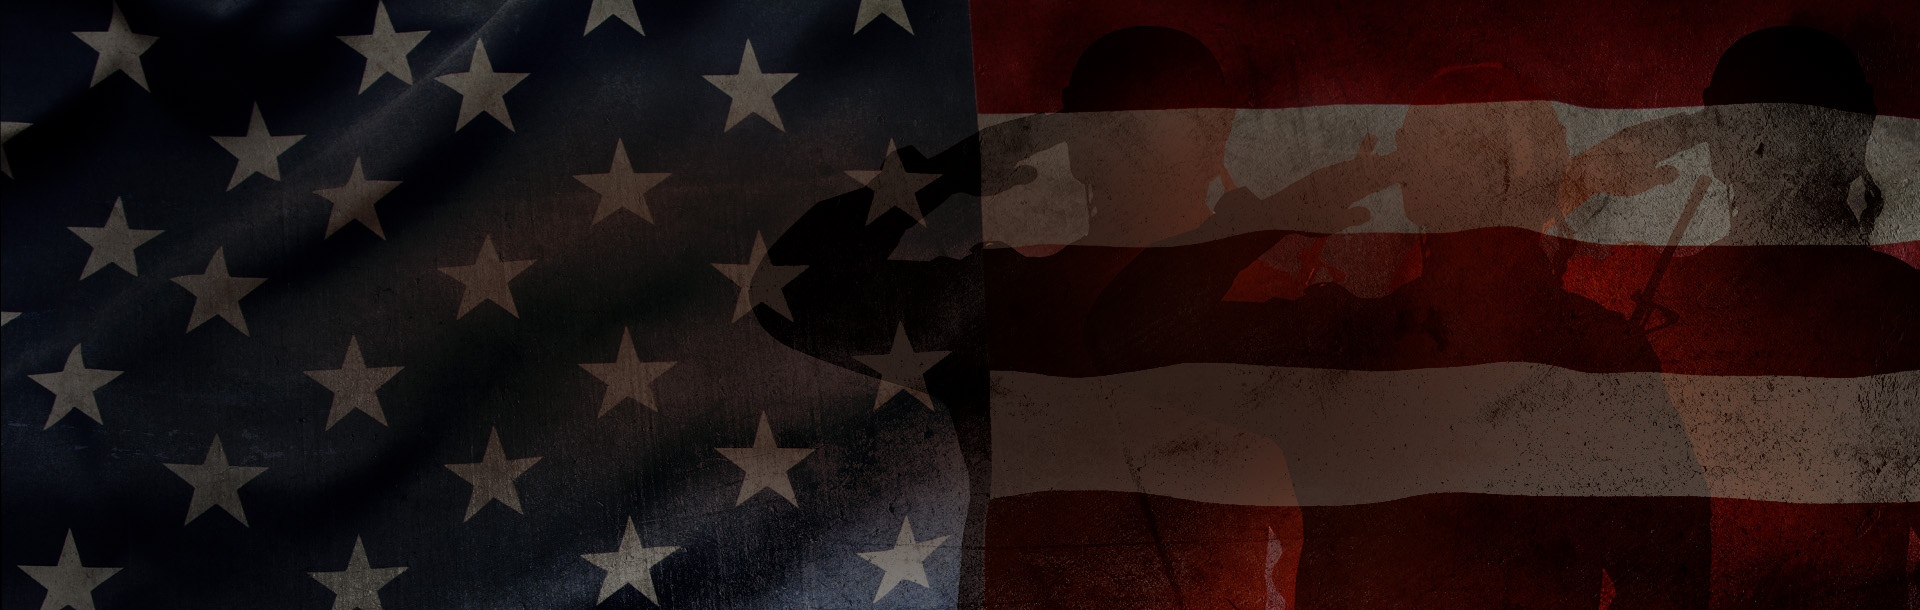 3339-Memorial-Day-High-Level-Site-Banners_HP_HeroCarousel_1920x610